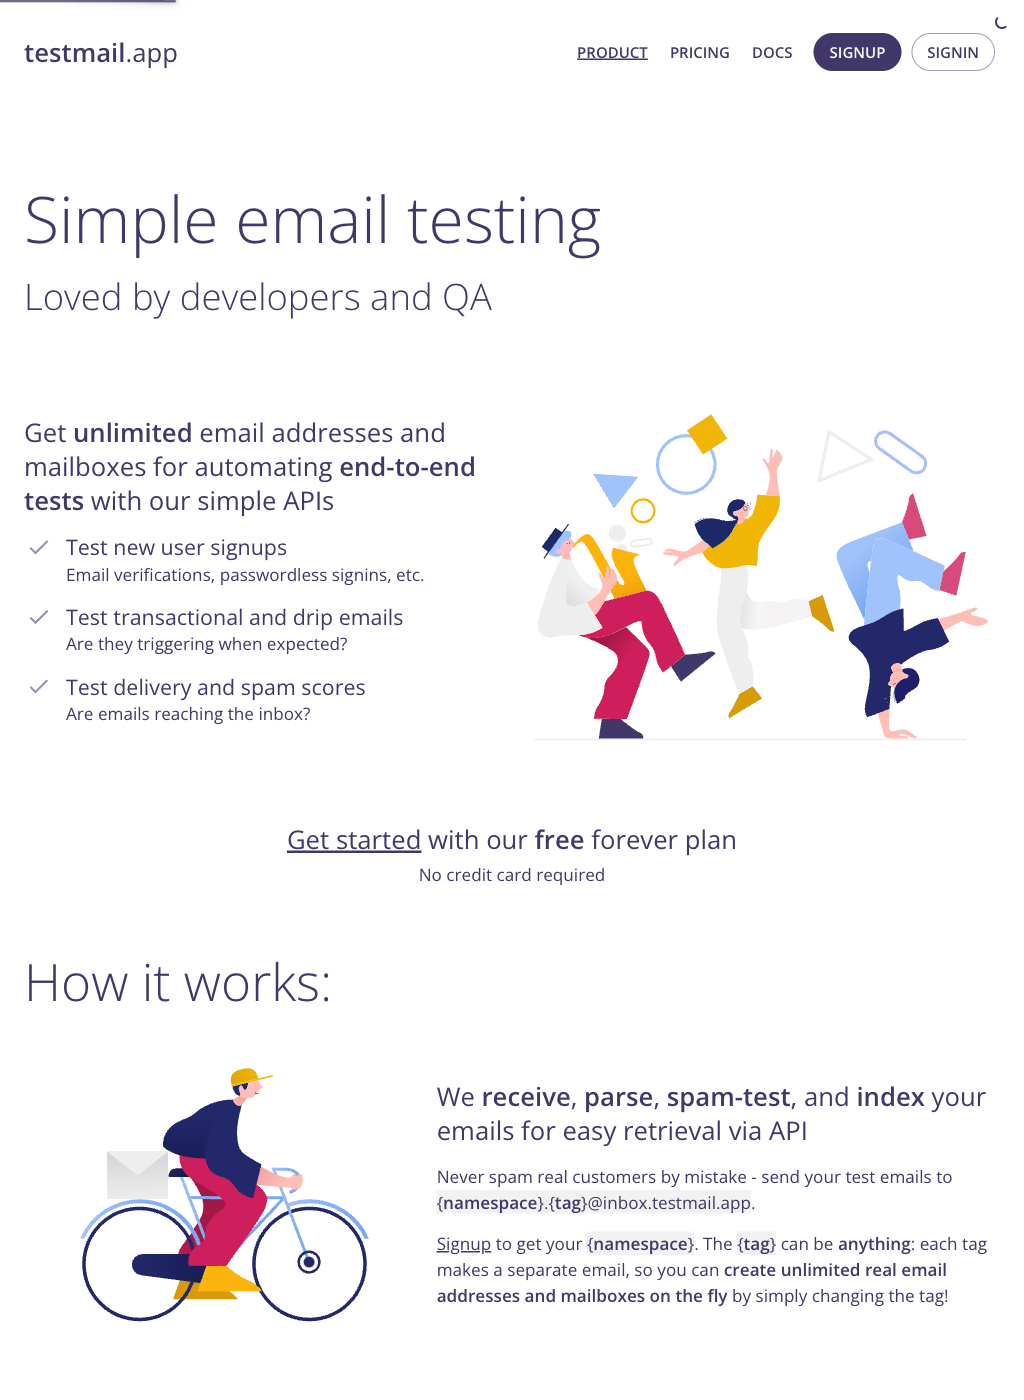 TestMail